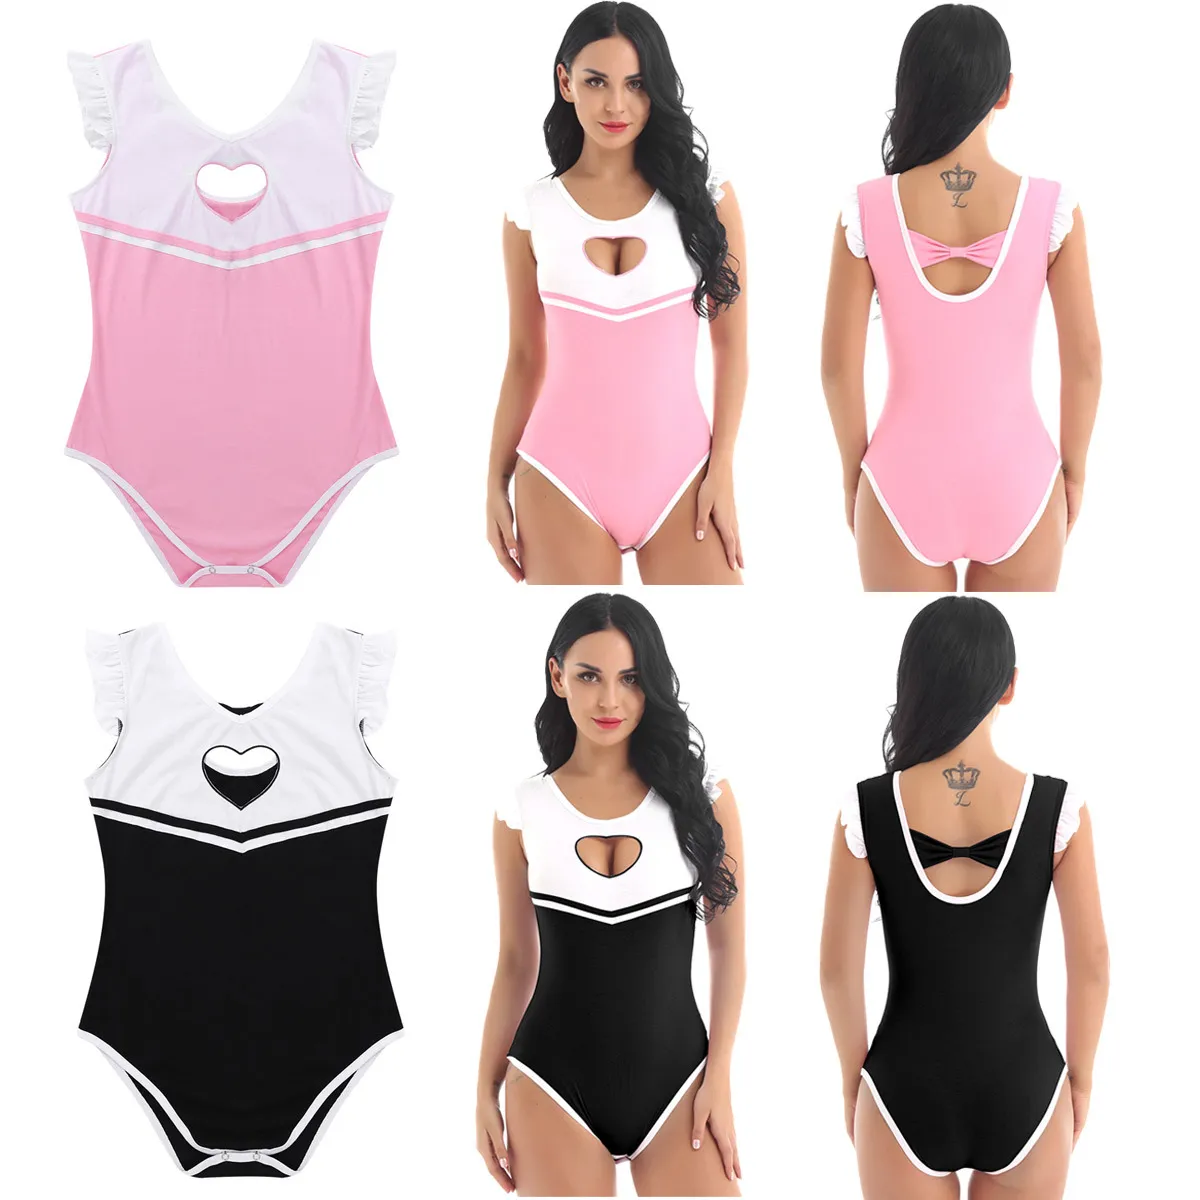 Heart Shaped Cutout Bust Crotch Romper Light Pink Jumpsuit Bodysuit Womens  Adult Bodycon Lingerie Nightwear For Sexy Cosplay LY191222 From Dang09,  $10.98